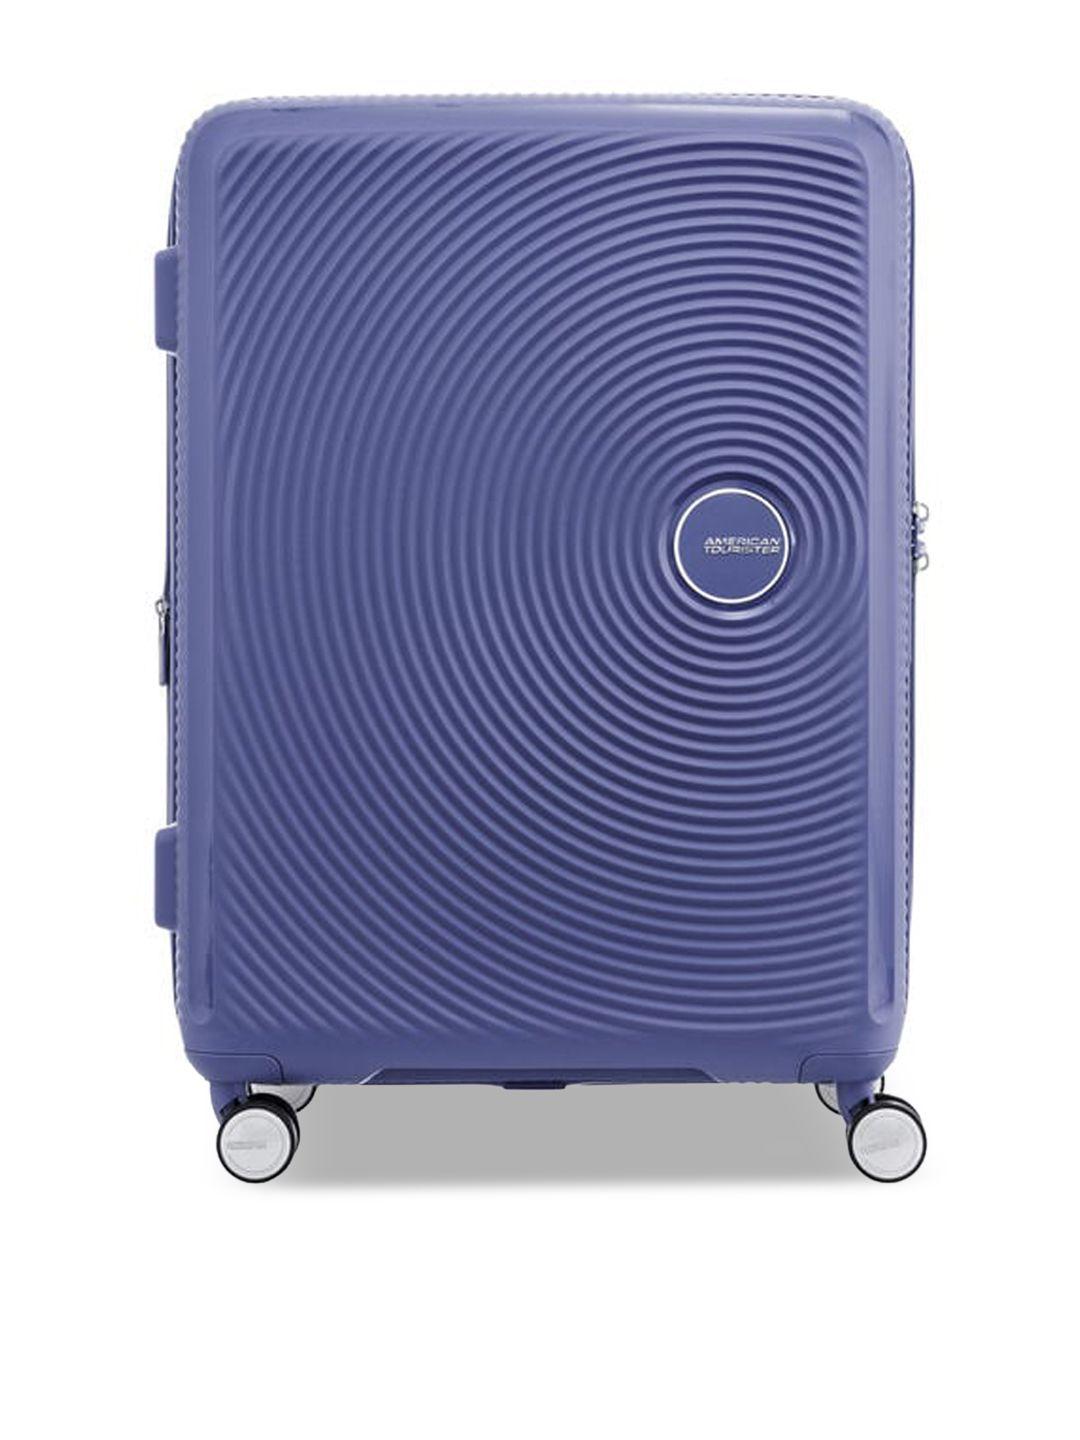 american tourister textured hard-sided large suitcase